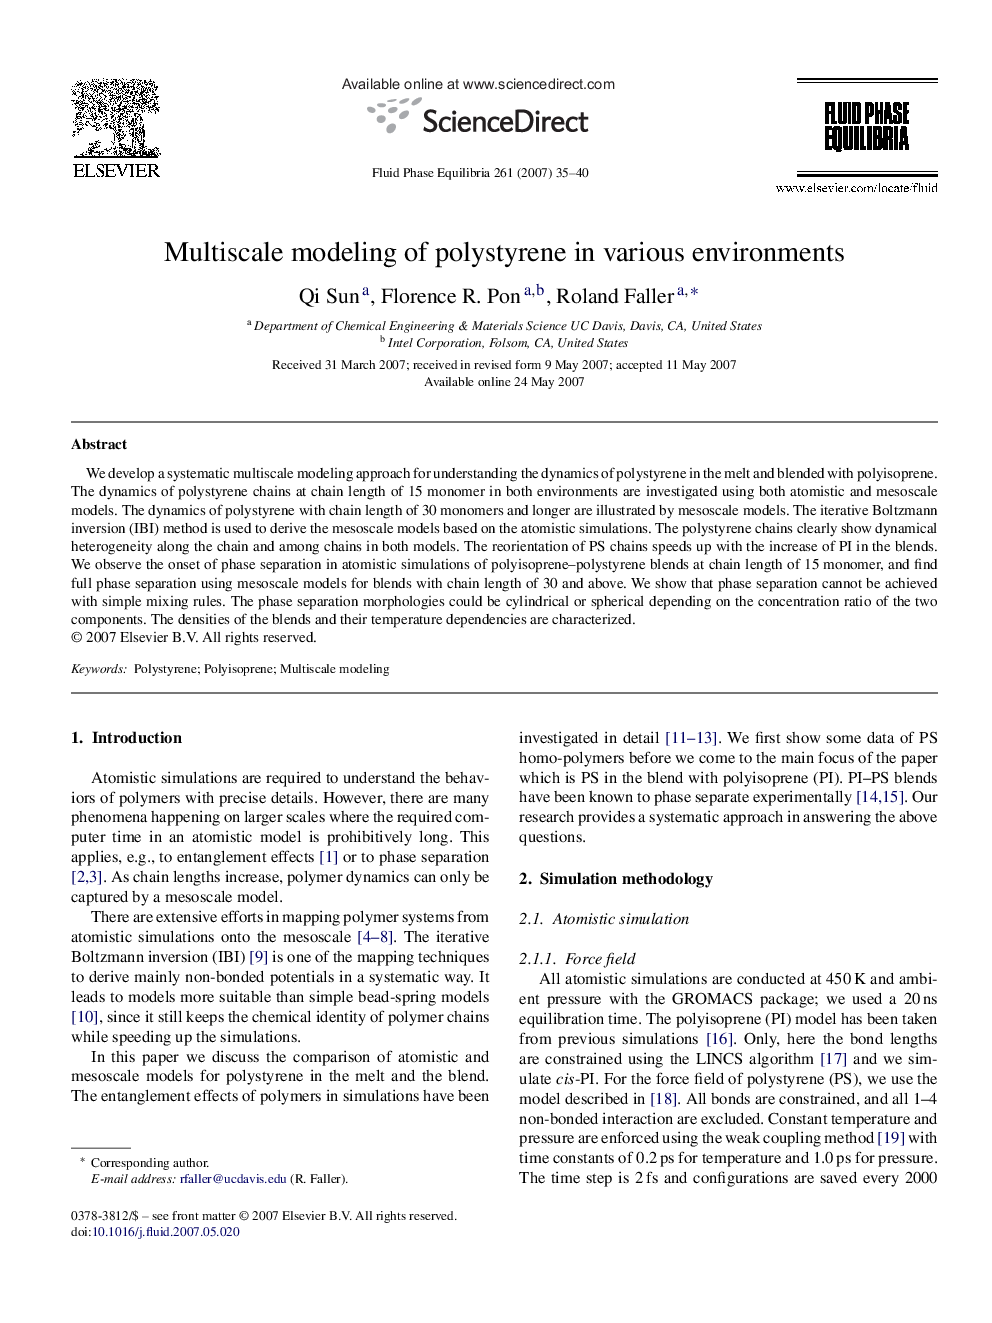 Multiscale modeling of polystyrene in various environments